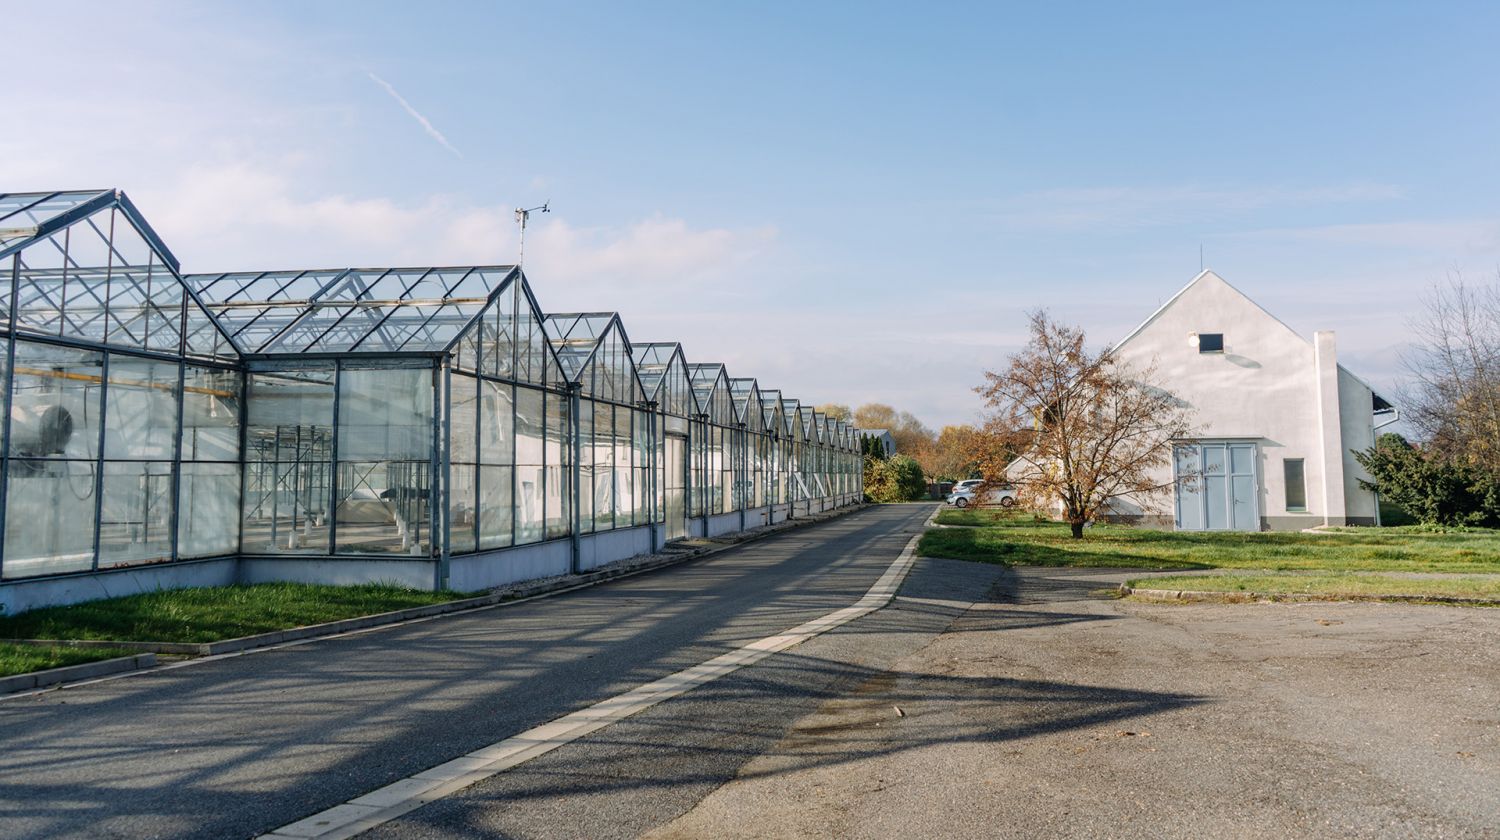 Future Farming is going to build another aquaponic farm in Přerov nad Labem